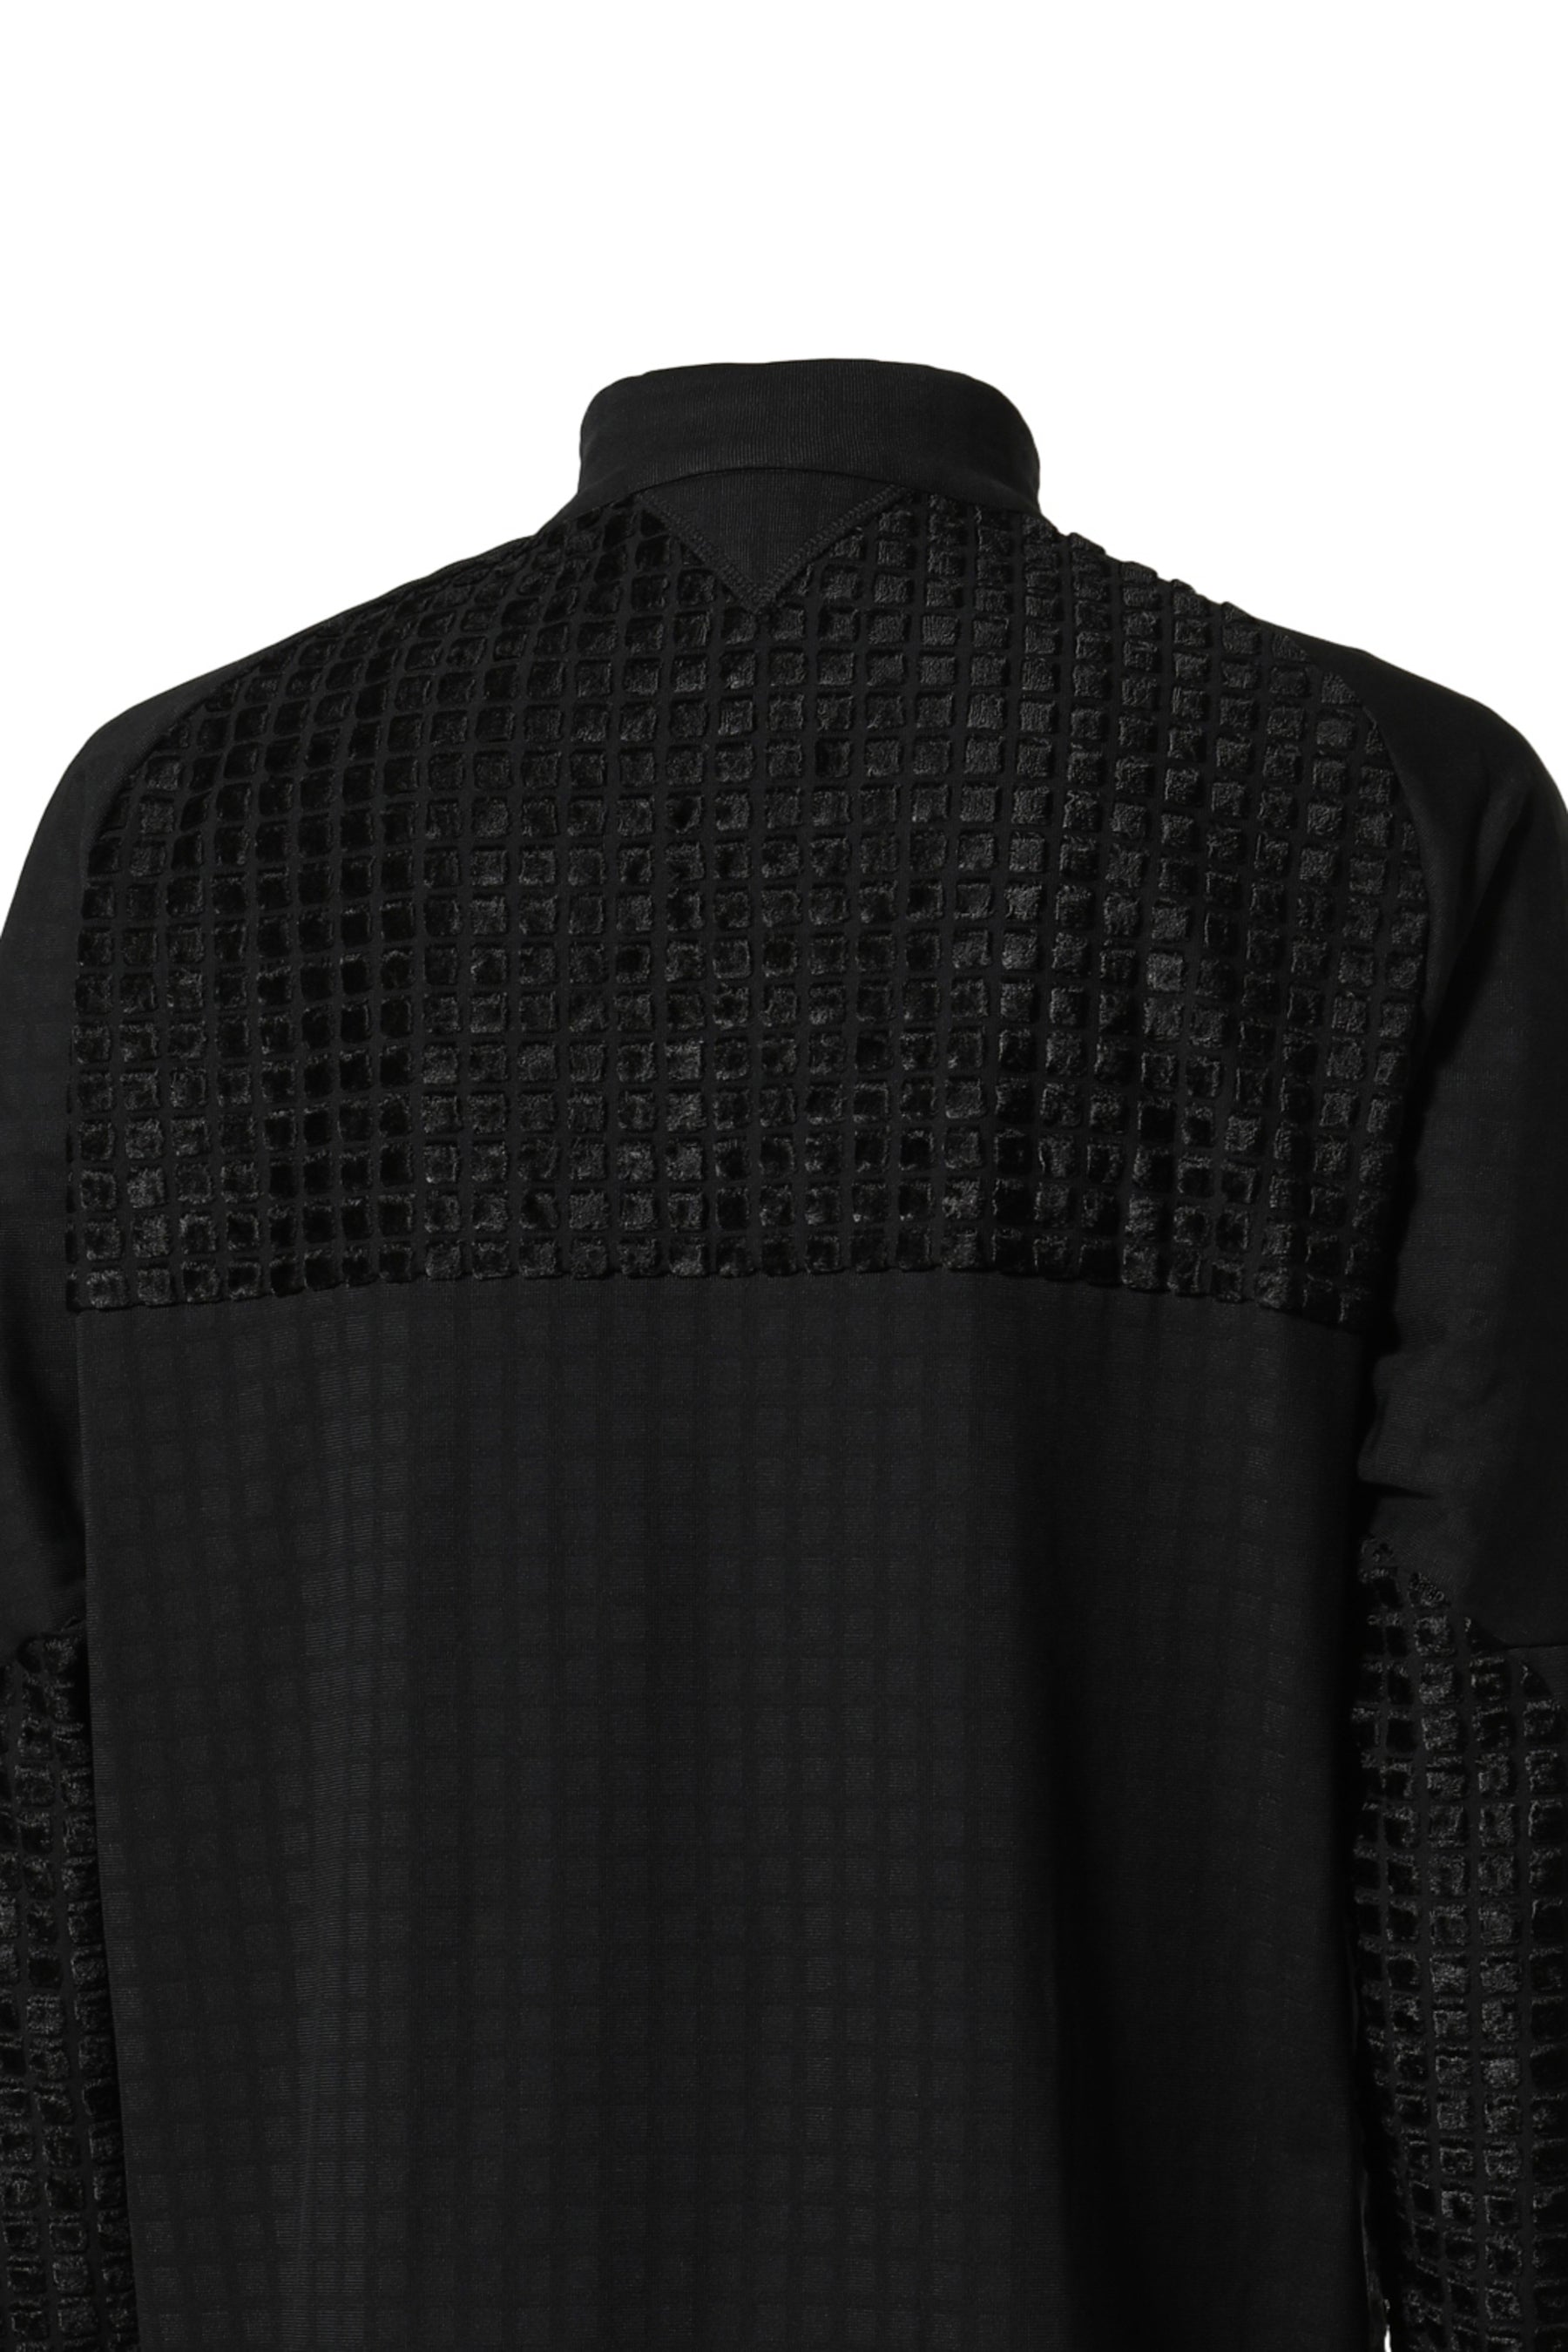 THERMO FLY PULLOVER / BLK